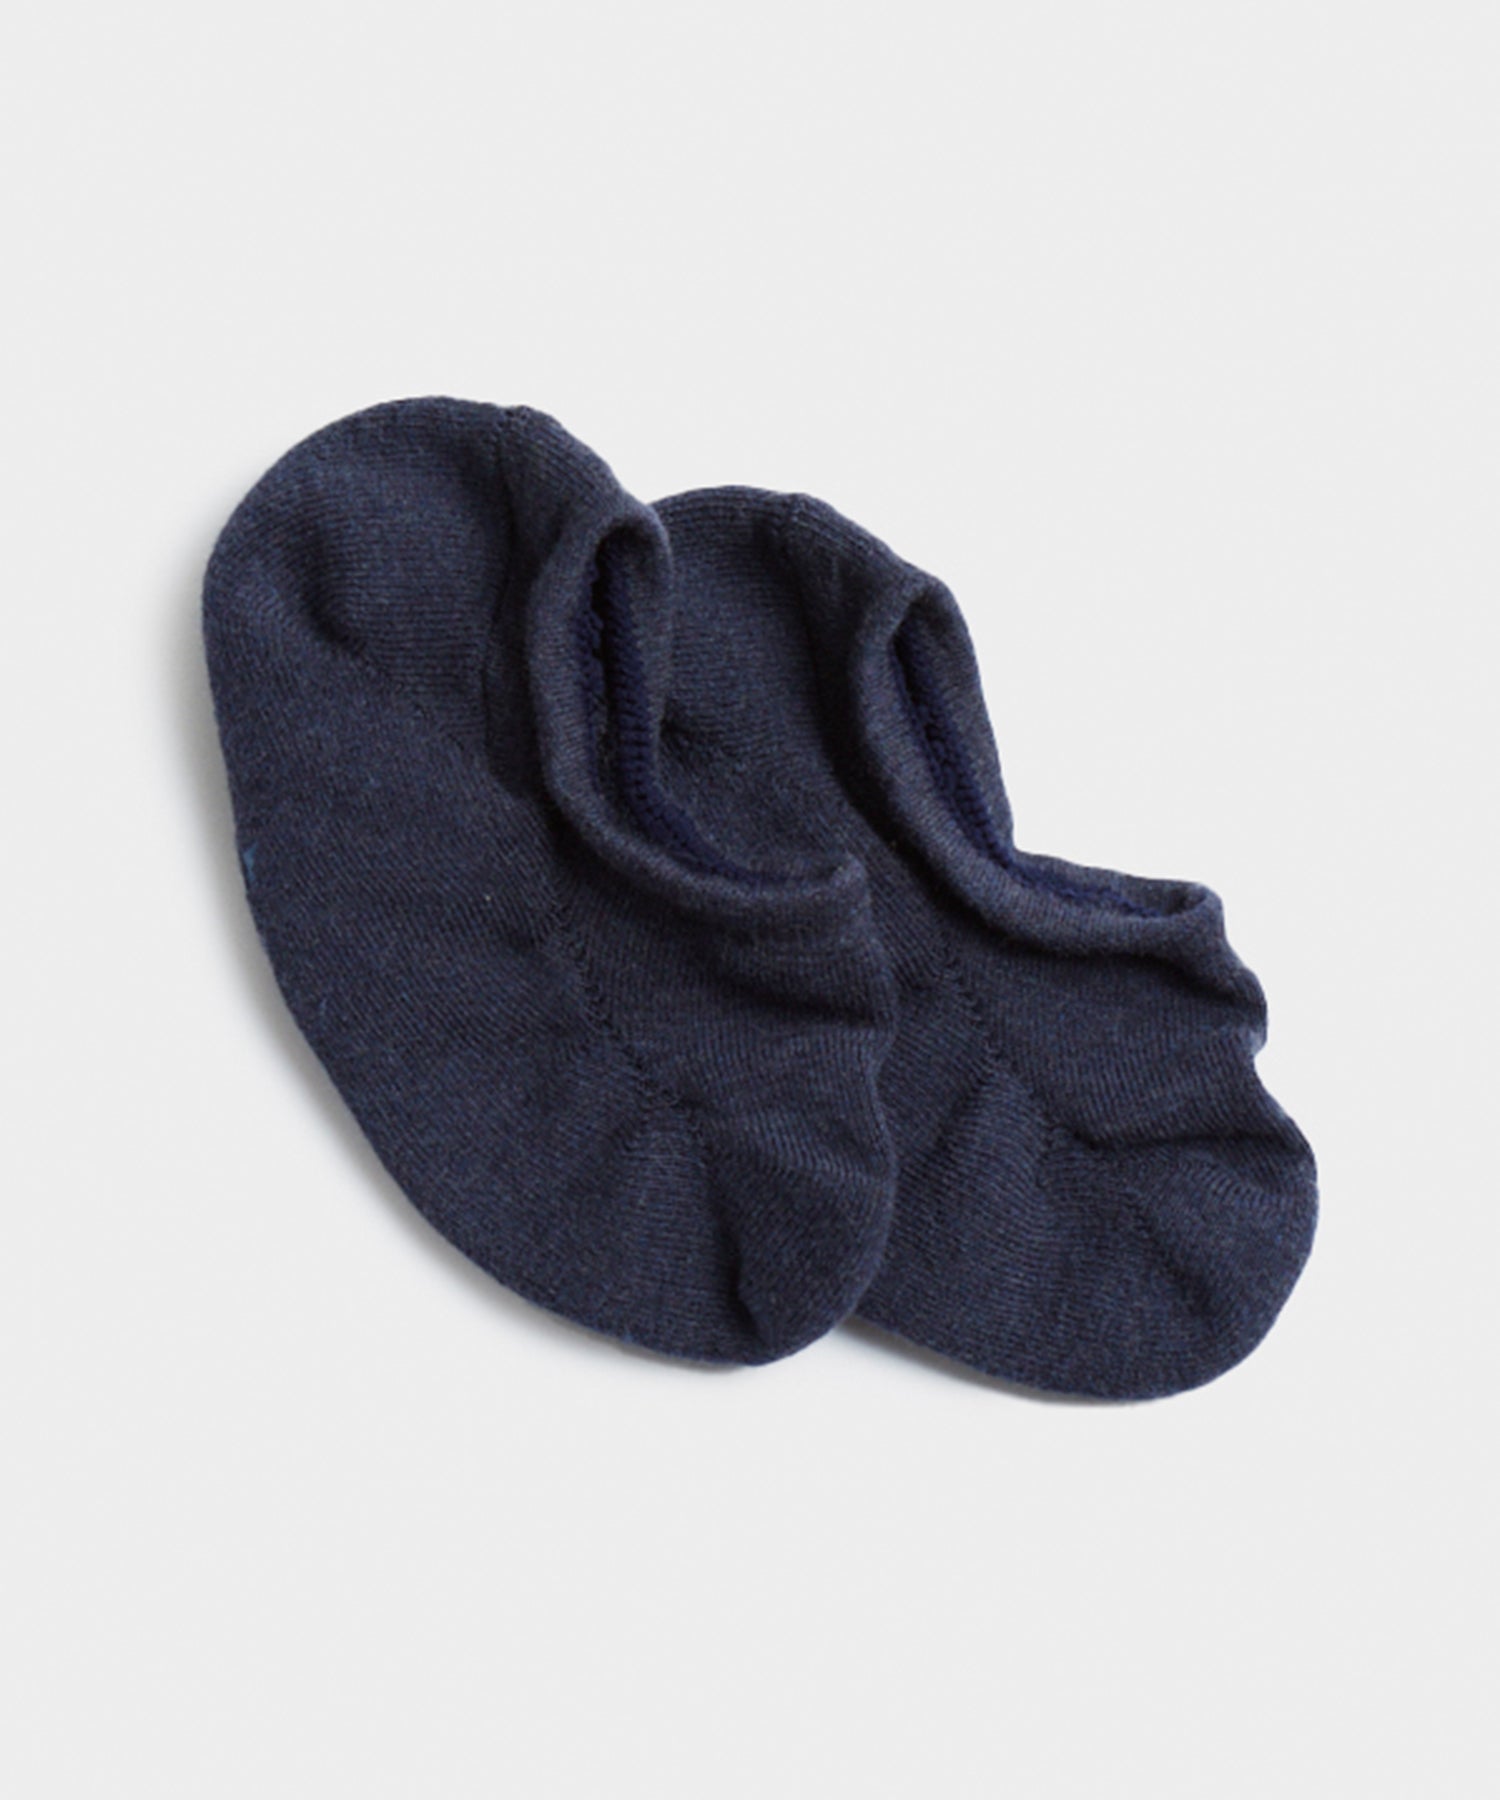 Rototo Pile Foot Cover in Navy